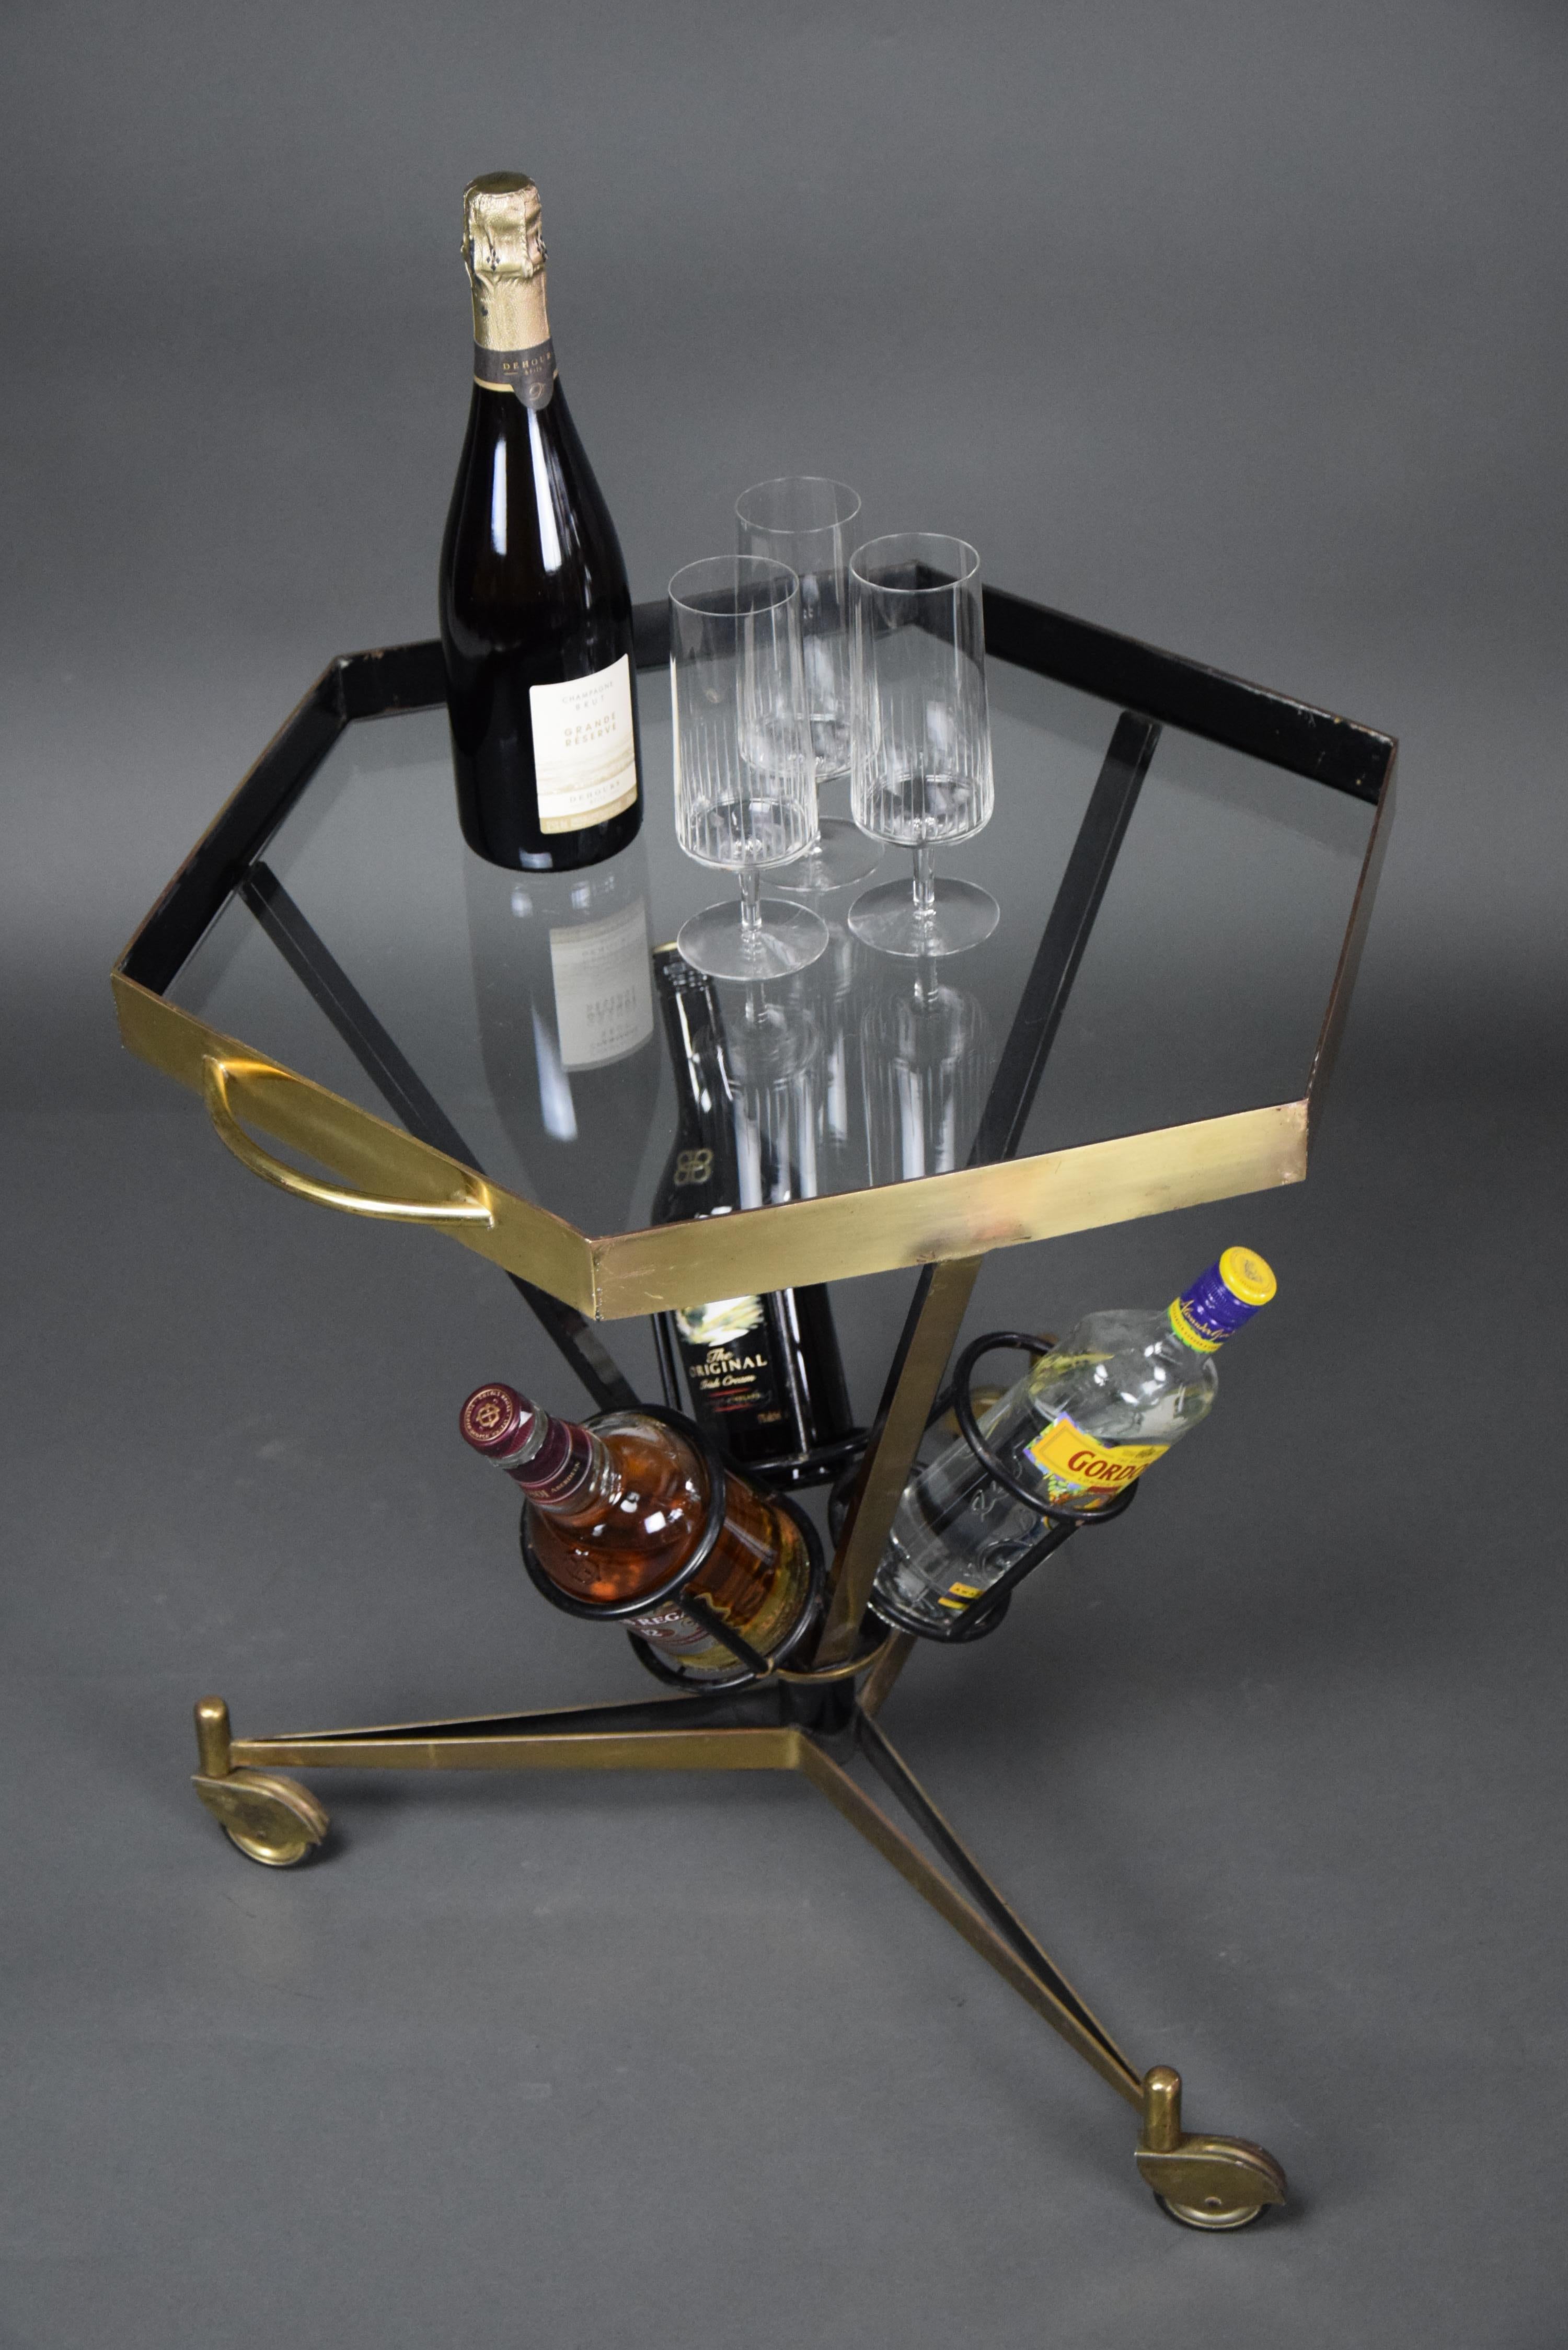 Stylish, classy and elegant Italian Mid-Century Modern brass and glass bar trolley.

The trolley will be shipped overseas in a custom made wooden crate. Cost of transport to the US is crate included.

Italy is a world trendsetter, and has produced